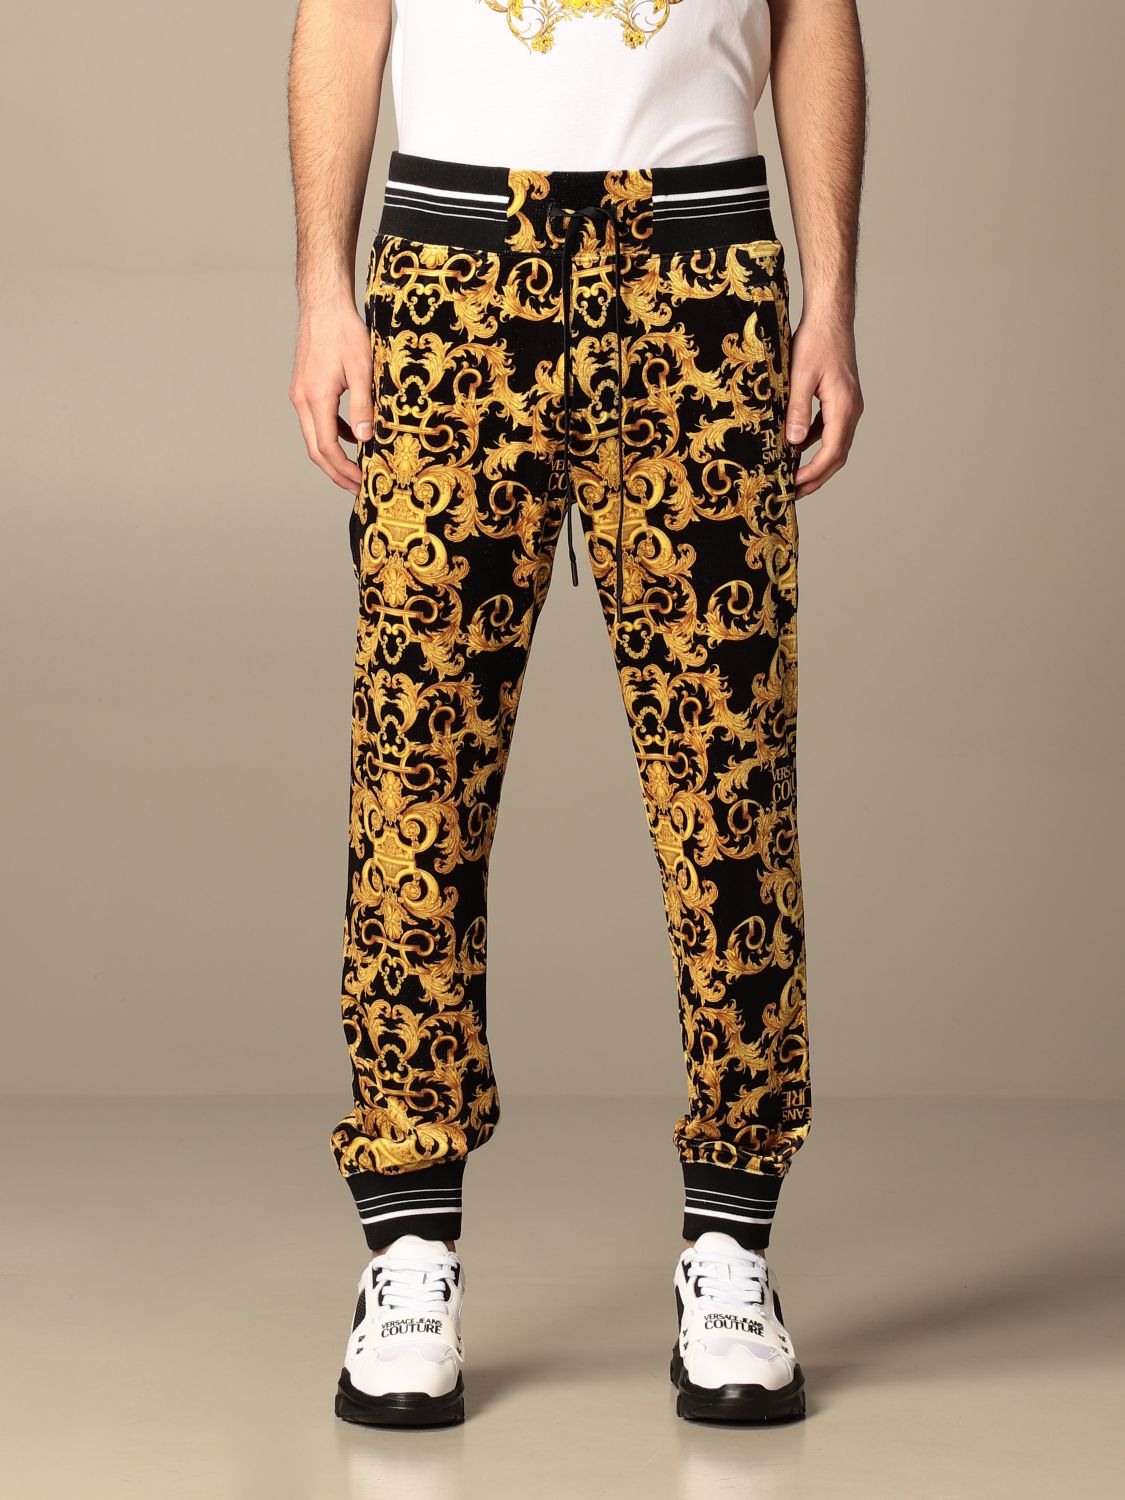 Casual black trousers for men with Logo Couture pattern  VERSACE JEANS  COUTURE  Pavidas